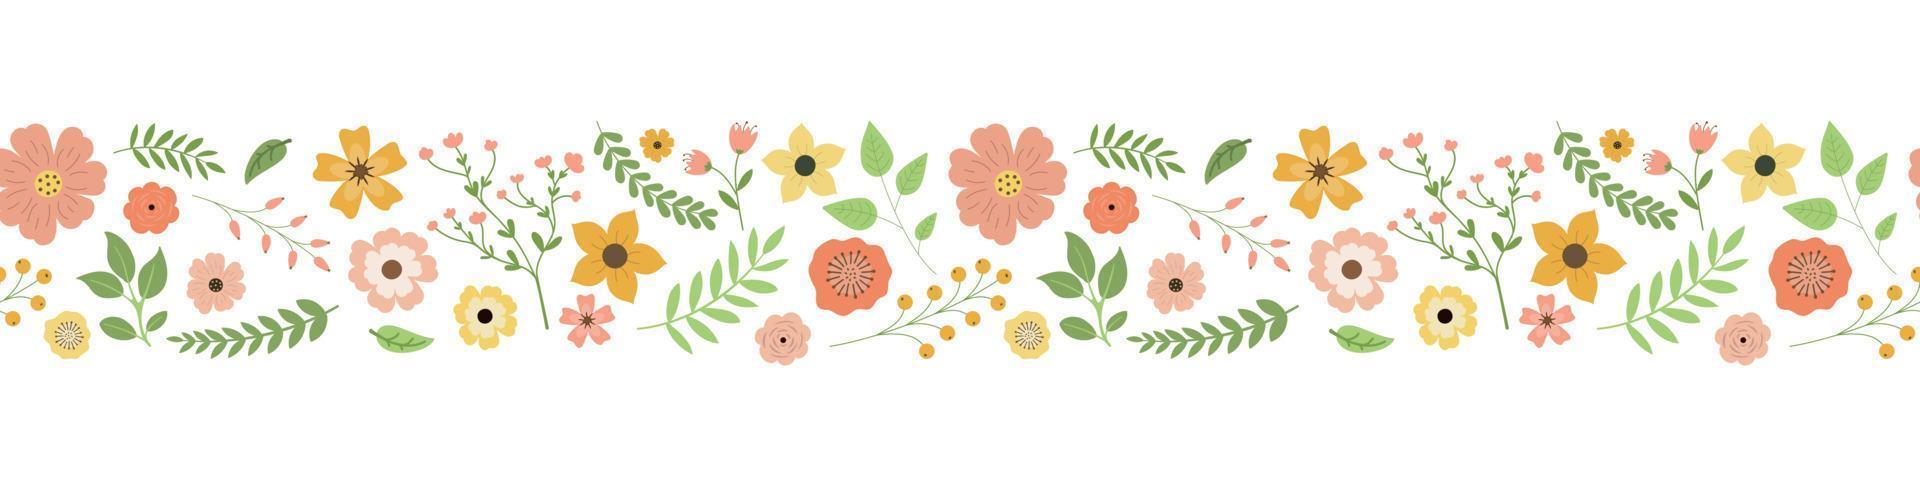 Cartoon spring flowers, leaves, and berries seamless border pattern. Isolated on white background. Colorful garden flowers in a row. Design for stickers, labels, and banners vector